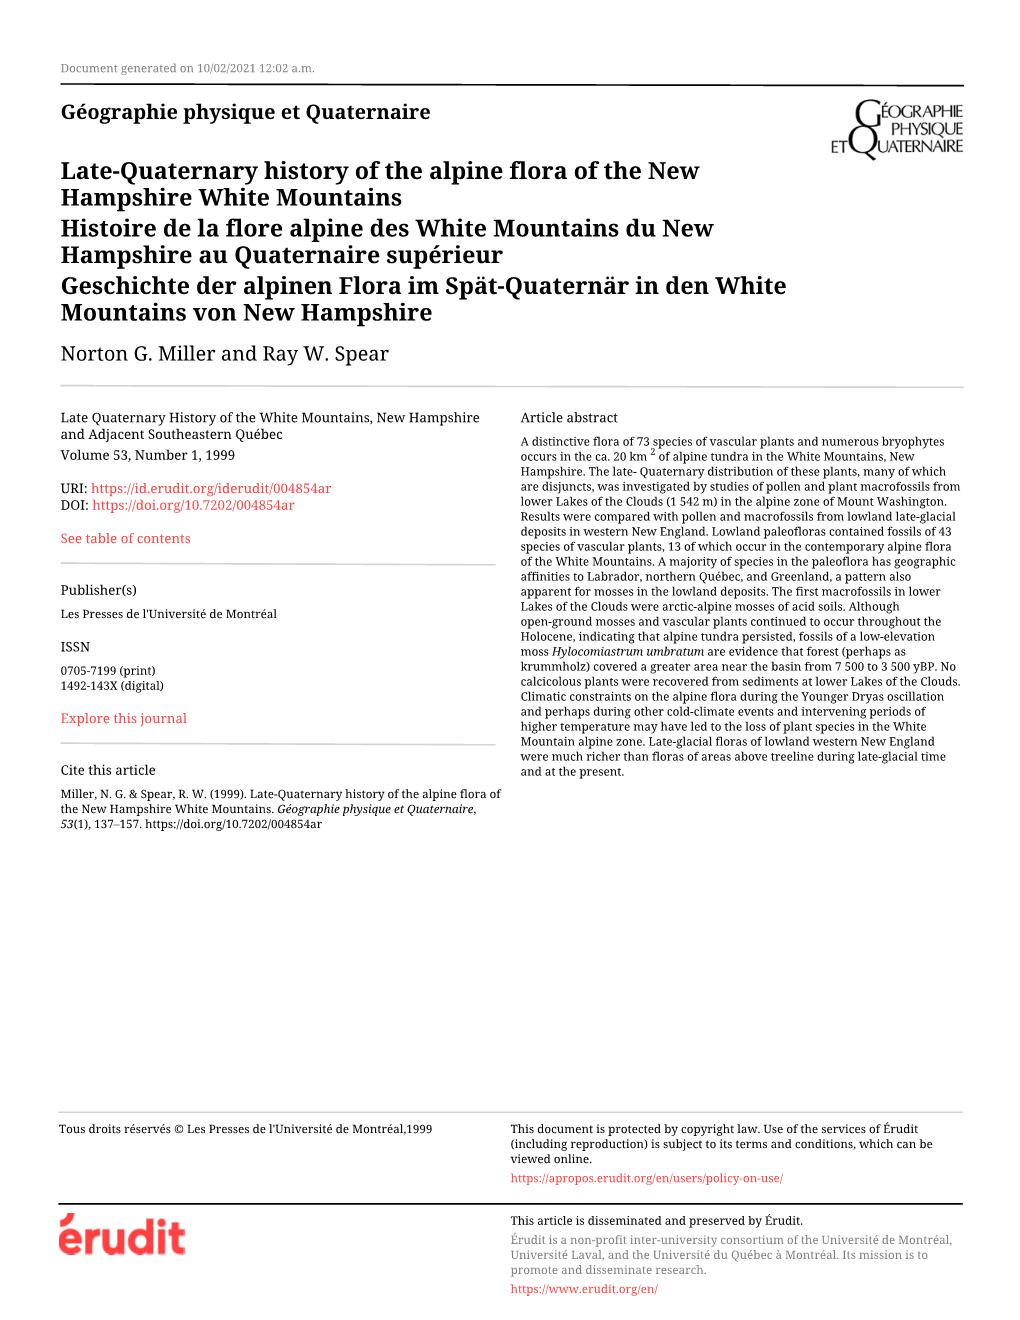 Late-Quaternary History of the Alpine Flora of the New Hampshire White